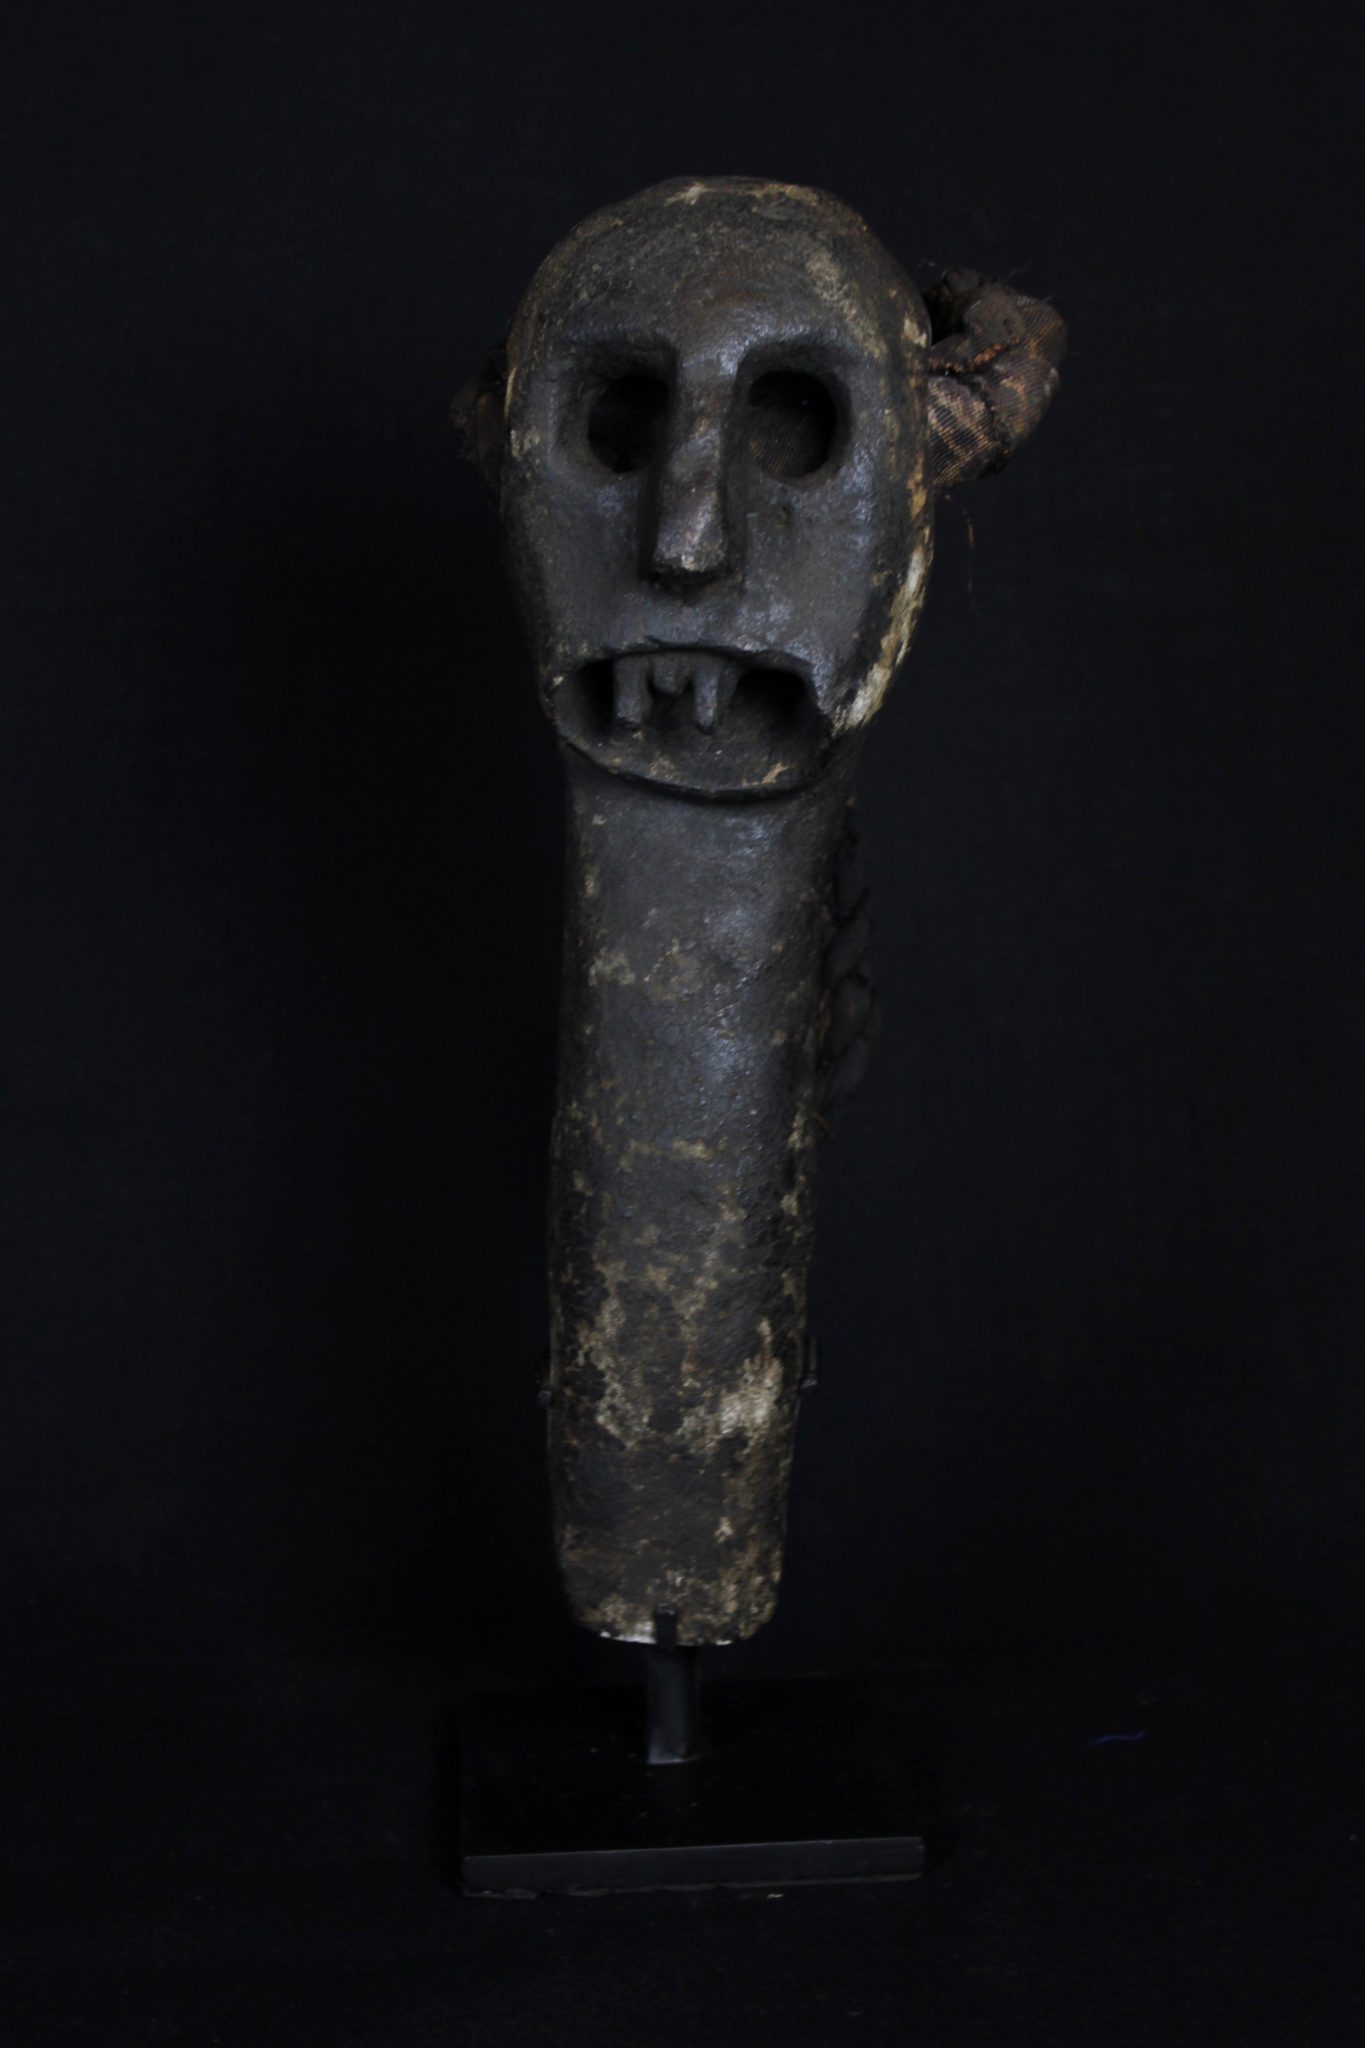 Nitta Watu (rare), Kitchen Protector Figure - Shaman Power Object, West Flores Island, Lesser Sunda Islands, Indonesia, Maumere district, Nita or Bena Village, Early to mid 19th c, Stone, pigment, cloth strap for hanging. Used to protect a house or home. 14” x 5 ½” x 6”, $1700.